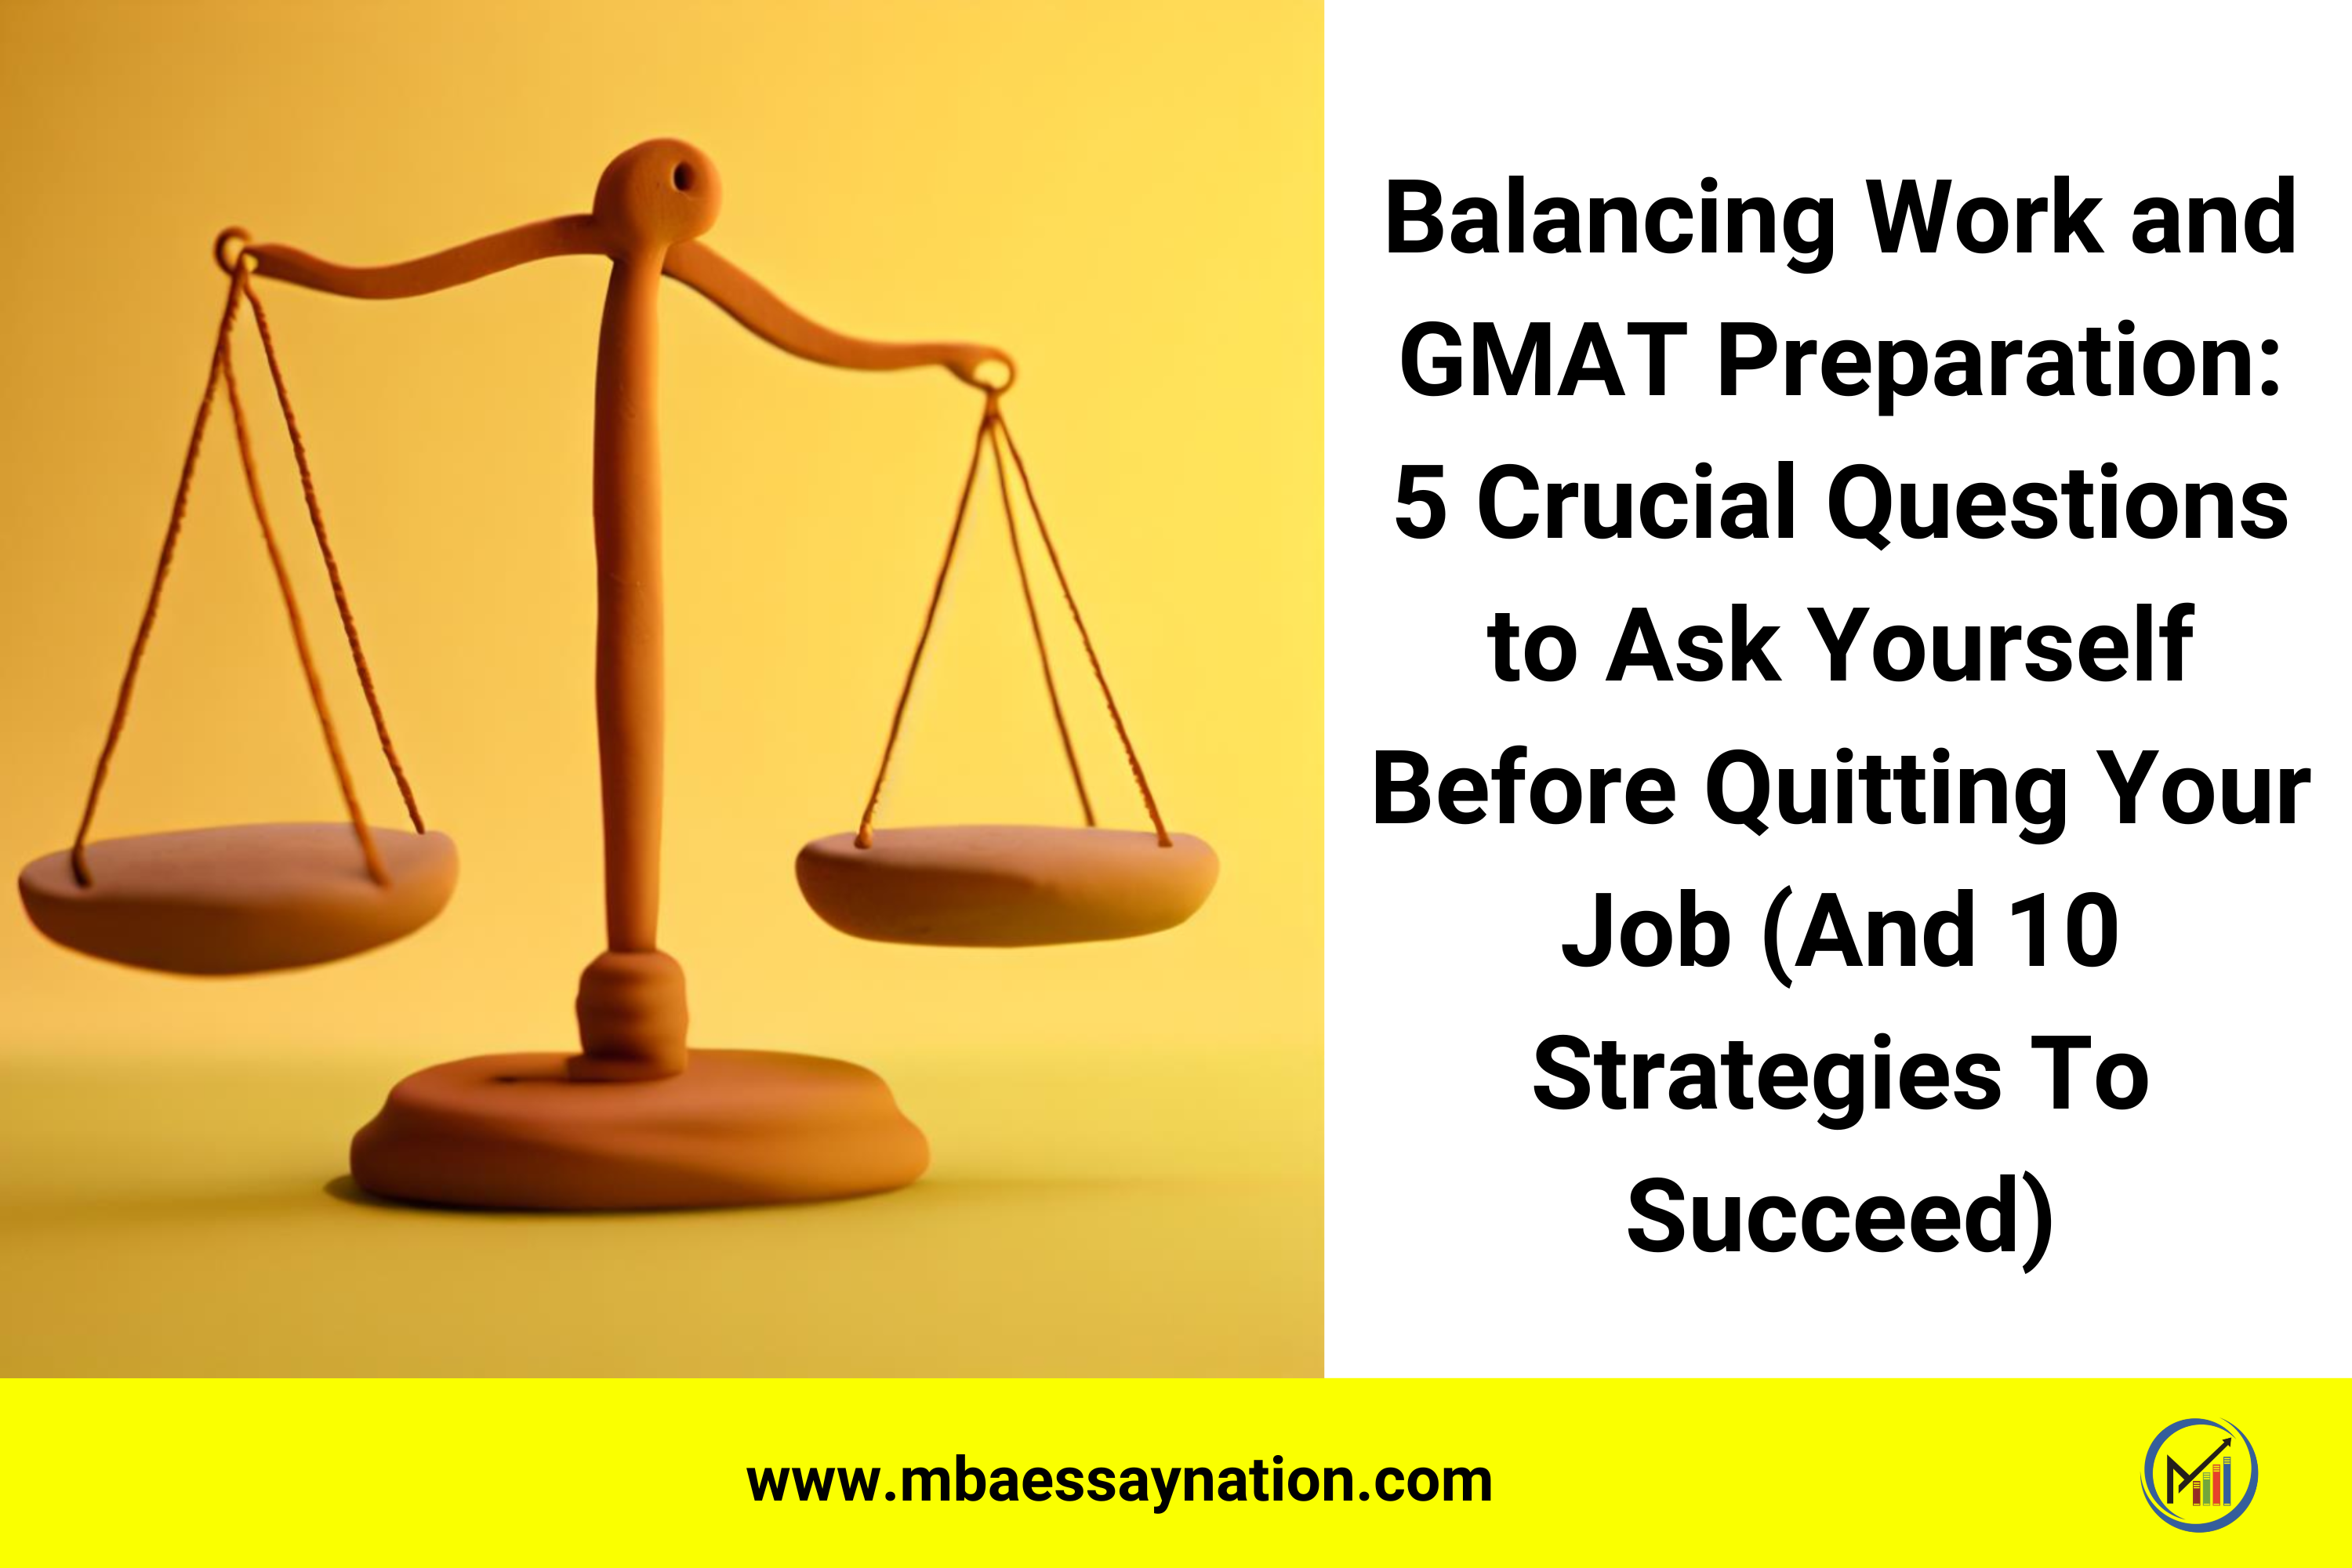 Balancing Work and GMAT Preparation 5 Crucial Questions to Ask Yourself Before Quitting Your Job